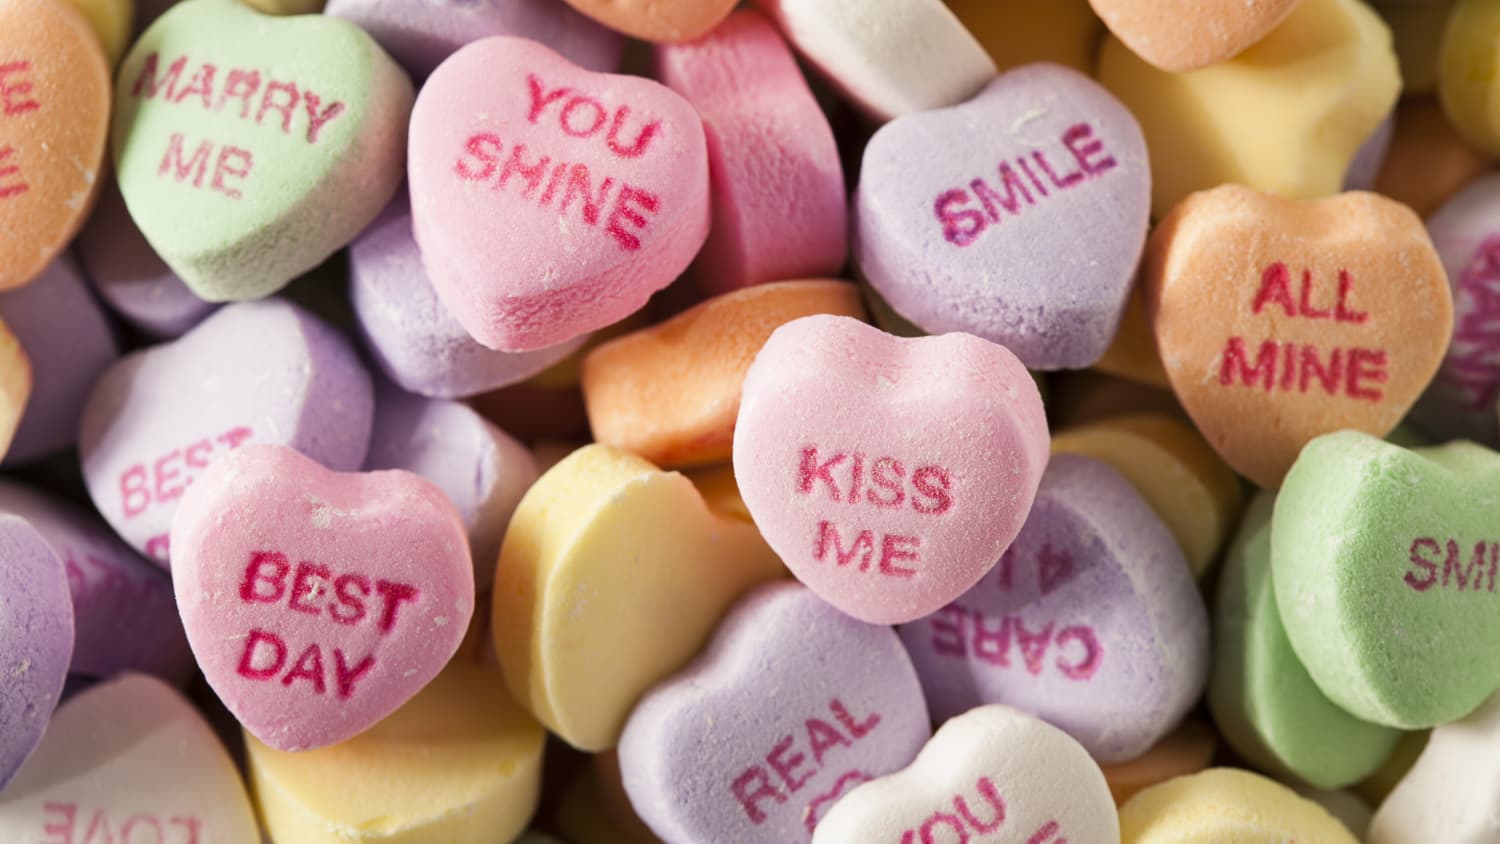 Sweethearts & Candy Hearts: A Nostalgic Valentine's Day – Memory Road